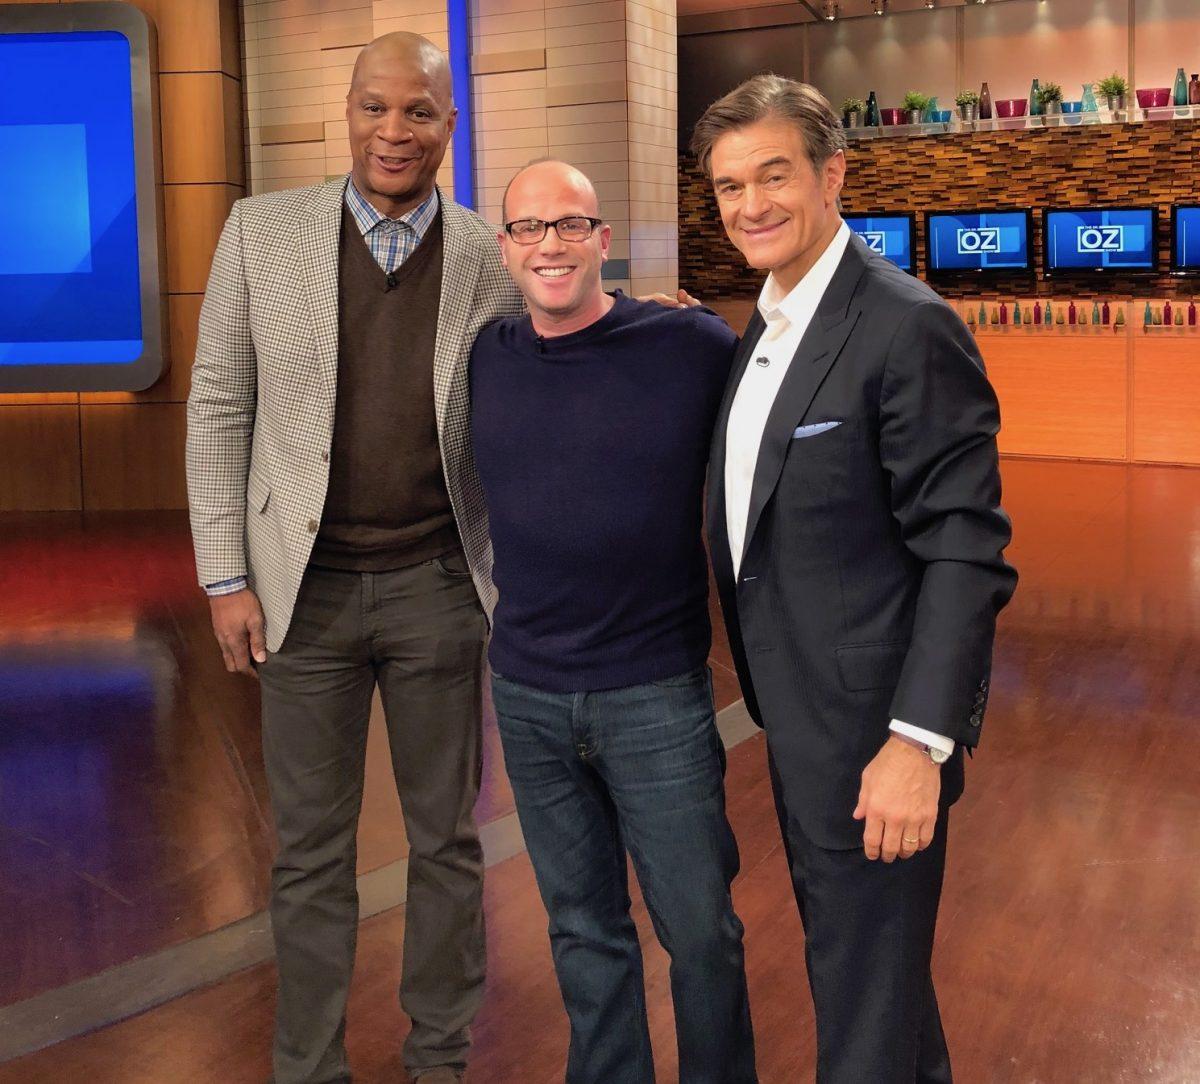 Darren Prince (C) on the set of "The Dr. Oz Show" where he appeared as a guest. (Courtesy of Darren Prince)